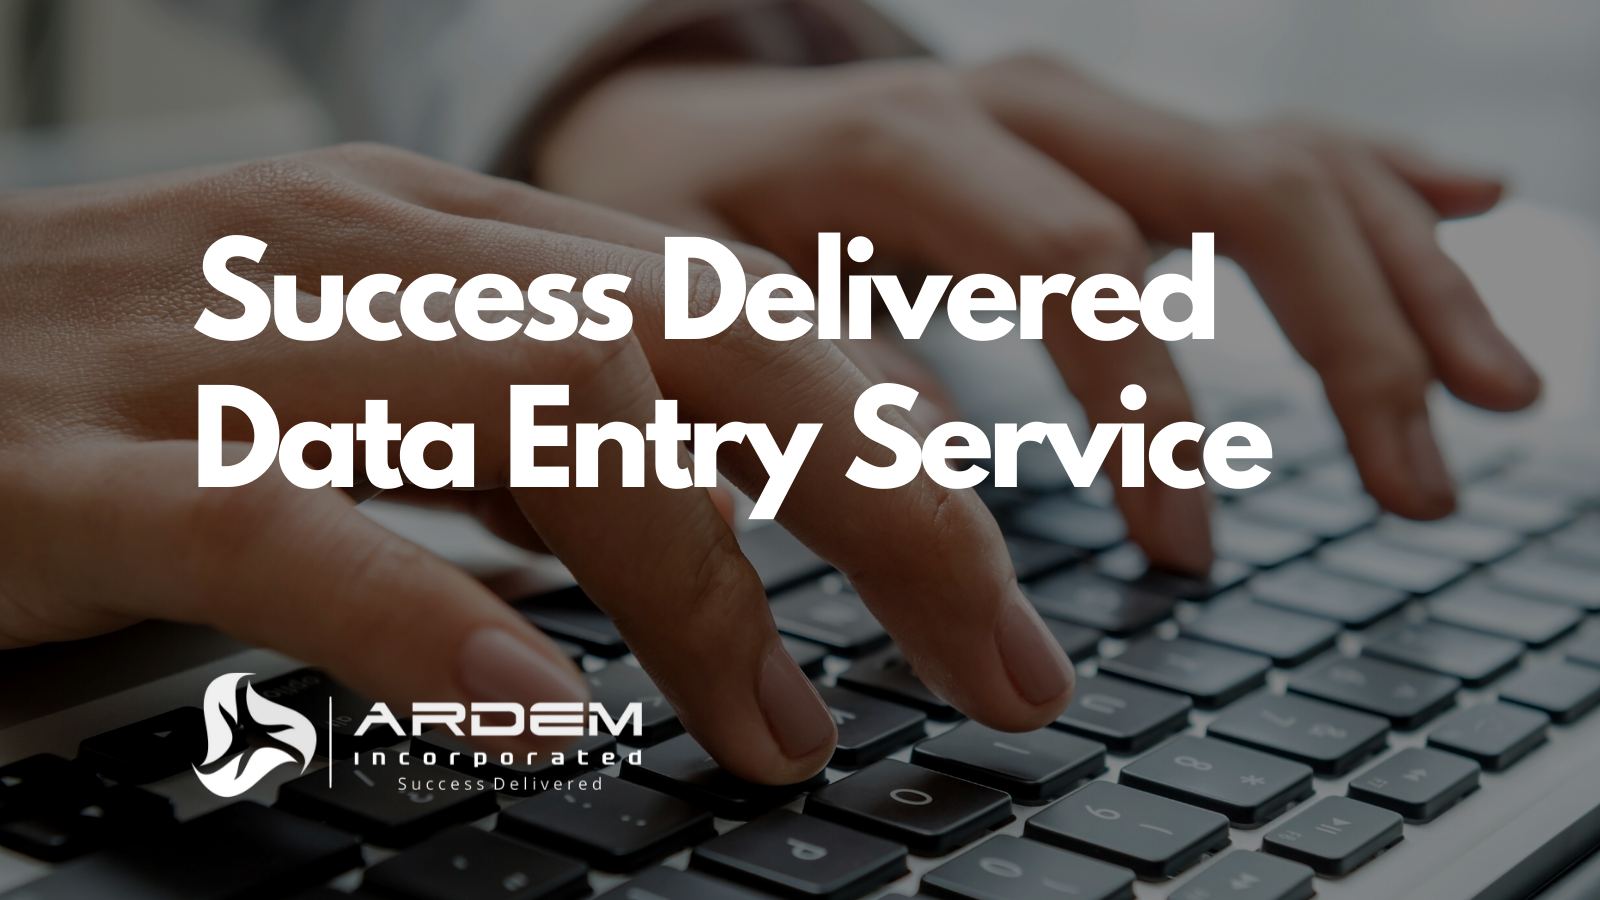 Data Entry Service Outsourcing